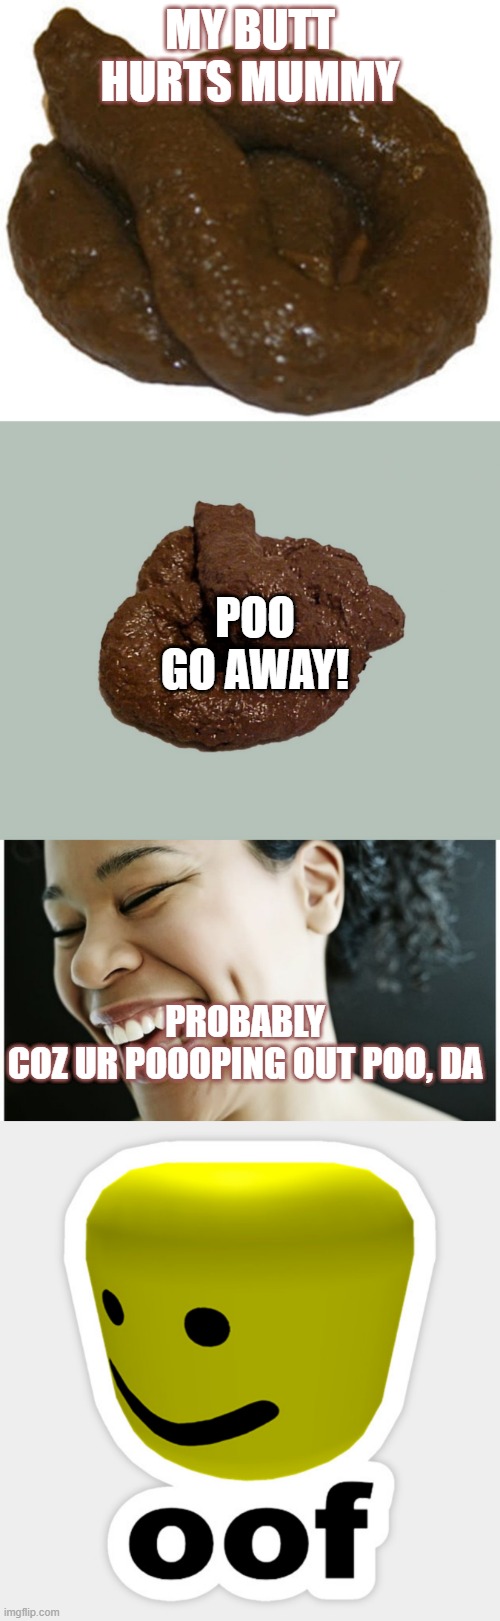  MY BUTT HURTS MUMMY; POO GO AWAY! PROBABLY COZ UR POOOPING OUT POO, DA | image tagged in poop | made w/ Imgflip meme maker